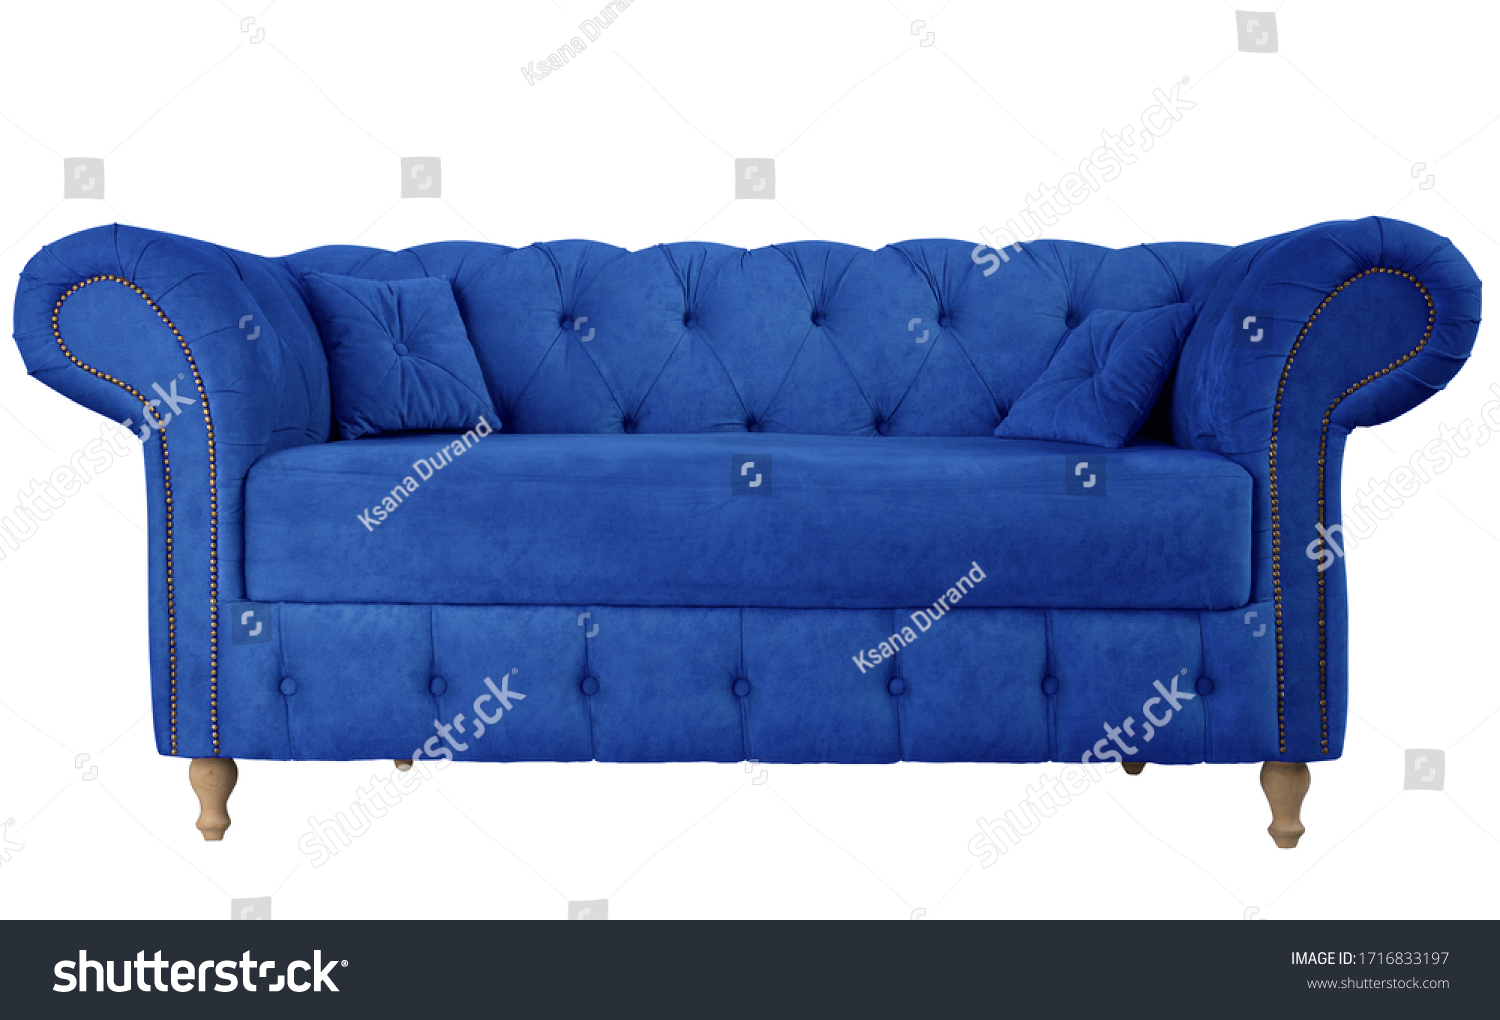 Navy blue sofa with pillows on wooden legs isolated on white. Darck blue suede couch isolated #1716833197